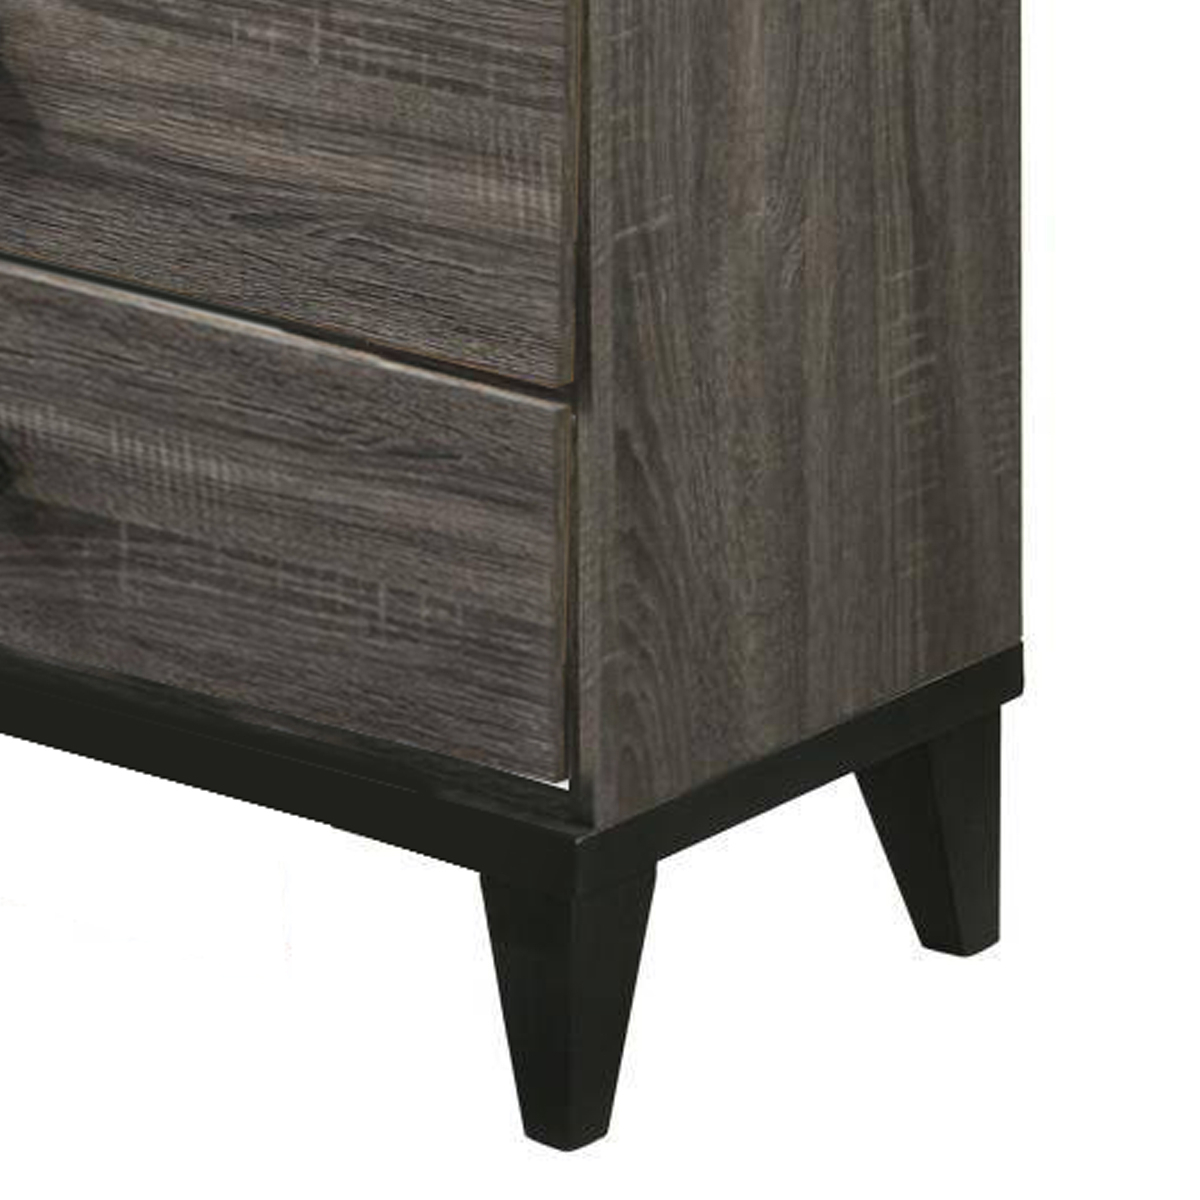 4 Drawer Wooden Chest With Grains And Angled Legs, Gray- Saltoro Sherpi